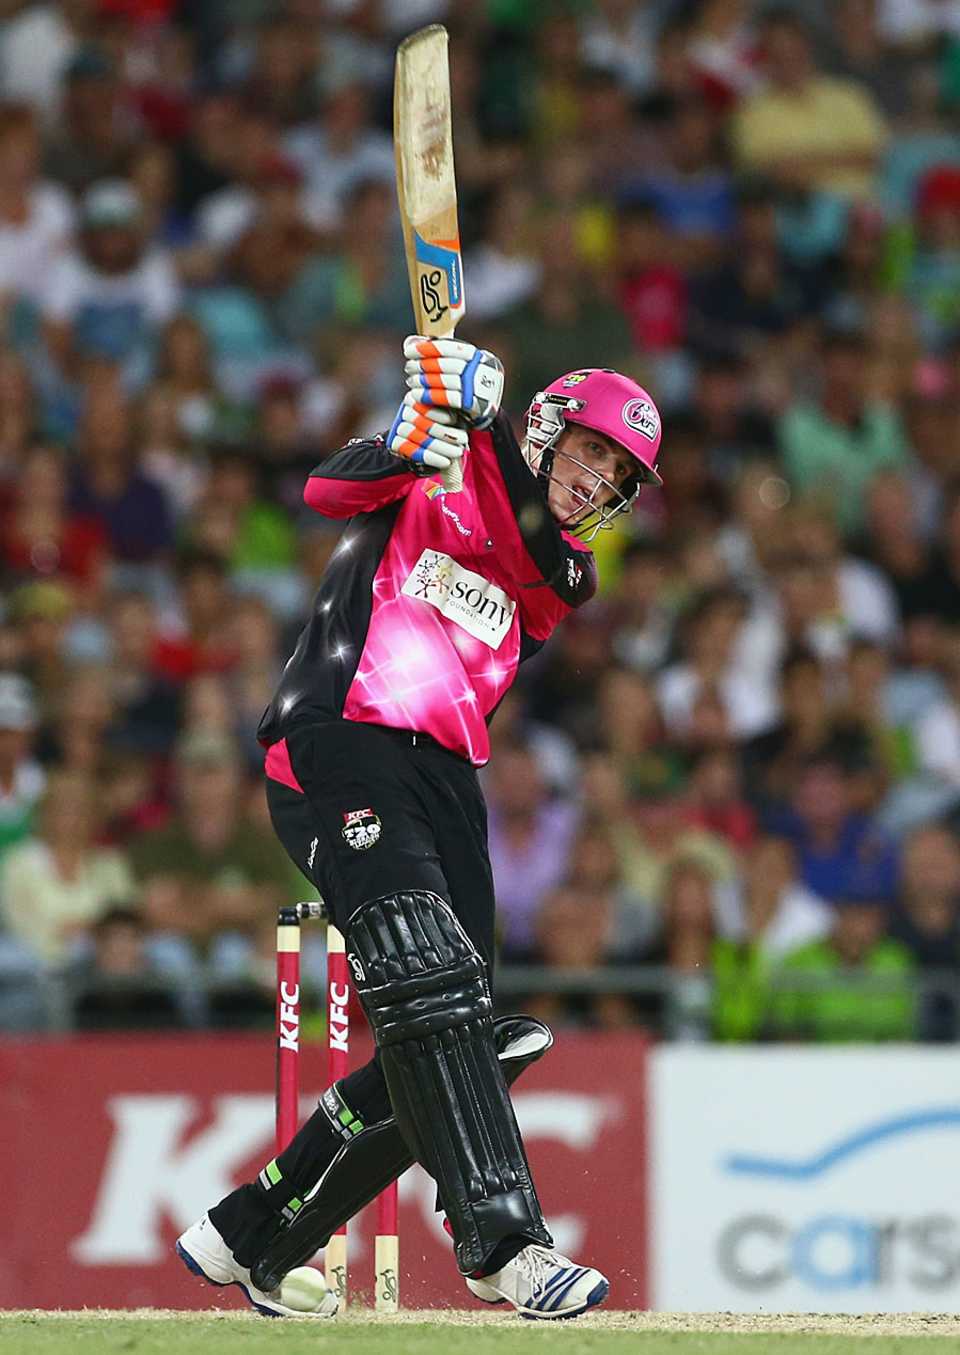 Daniel Hughes scored a fifty to take Sydney Sixers to a rare win